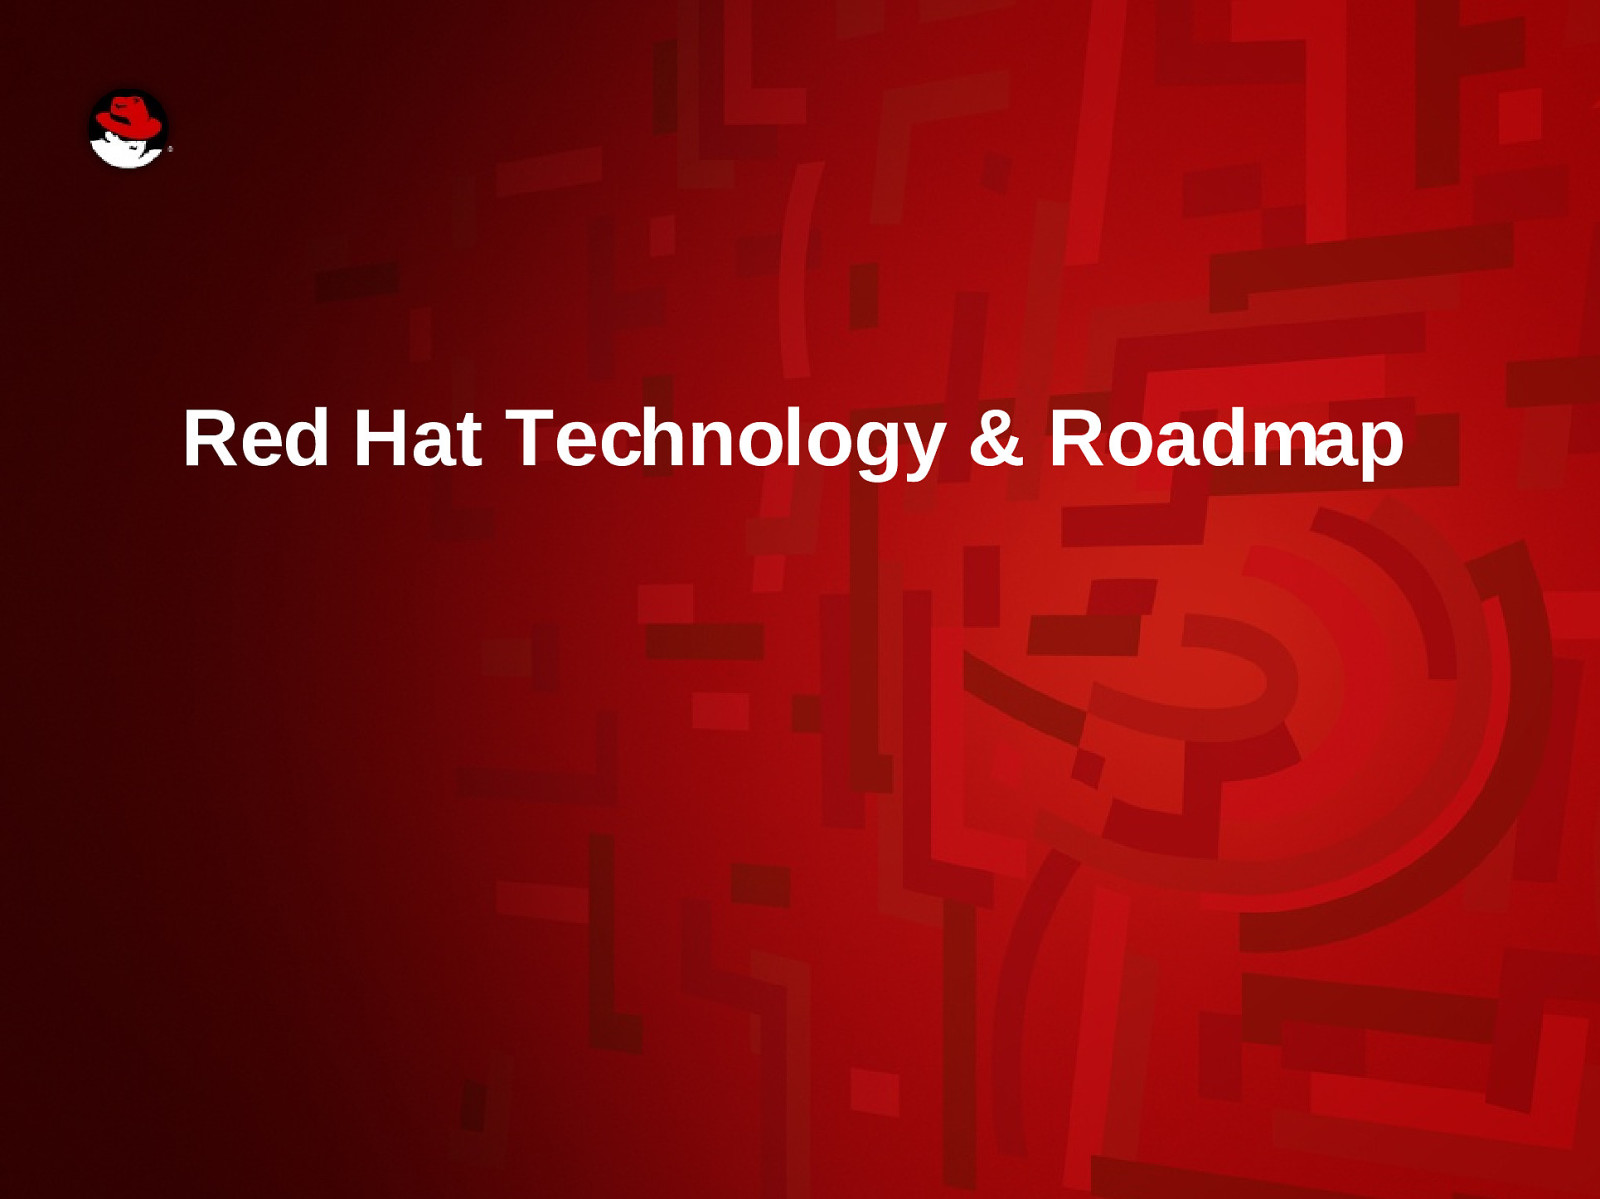 Red Hat Technology and Roadmap